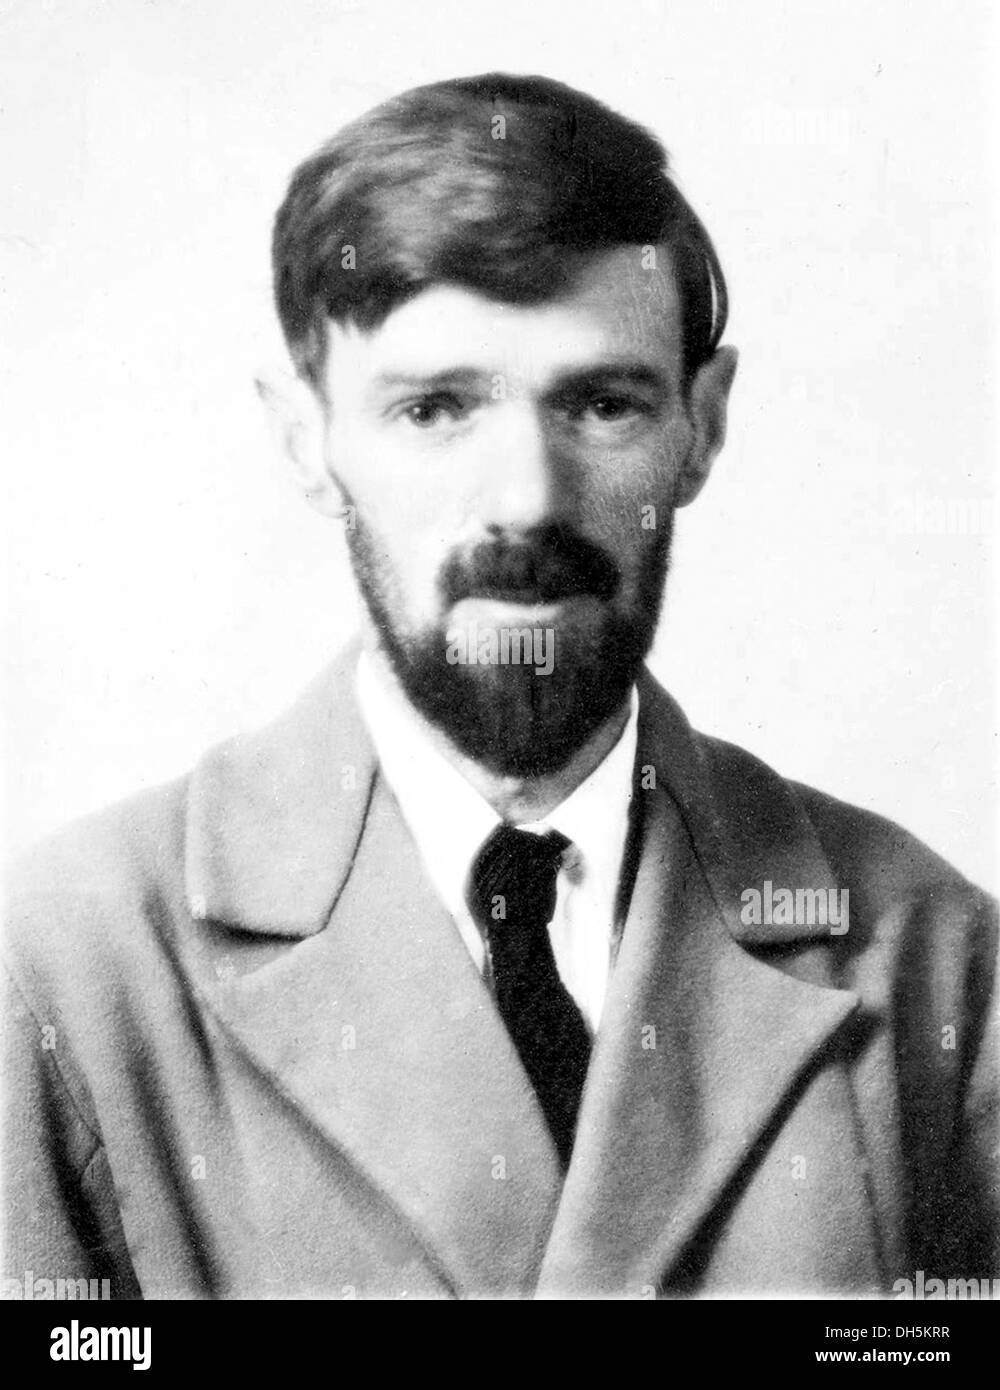 D.H.LAWRENCE  (1885-1930) English writer about 1912 Stock Photo